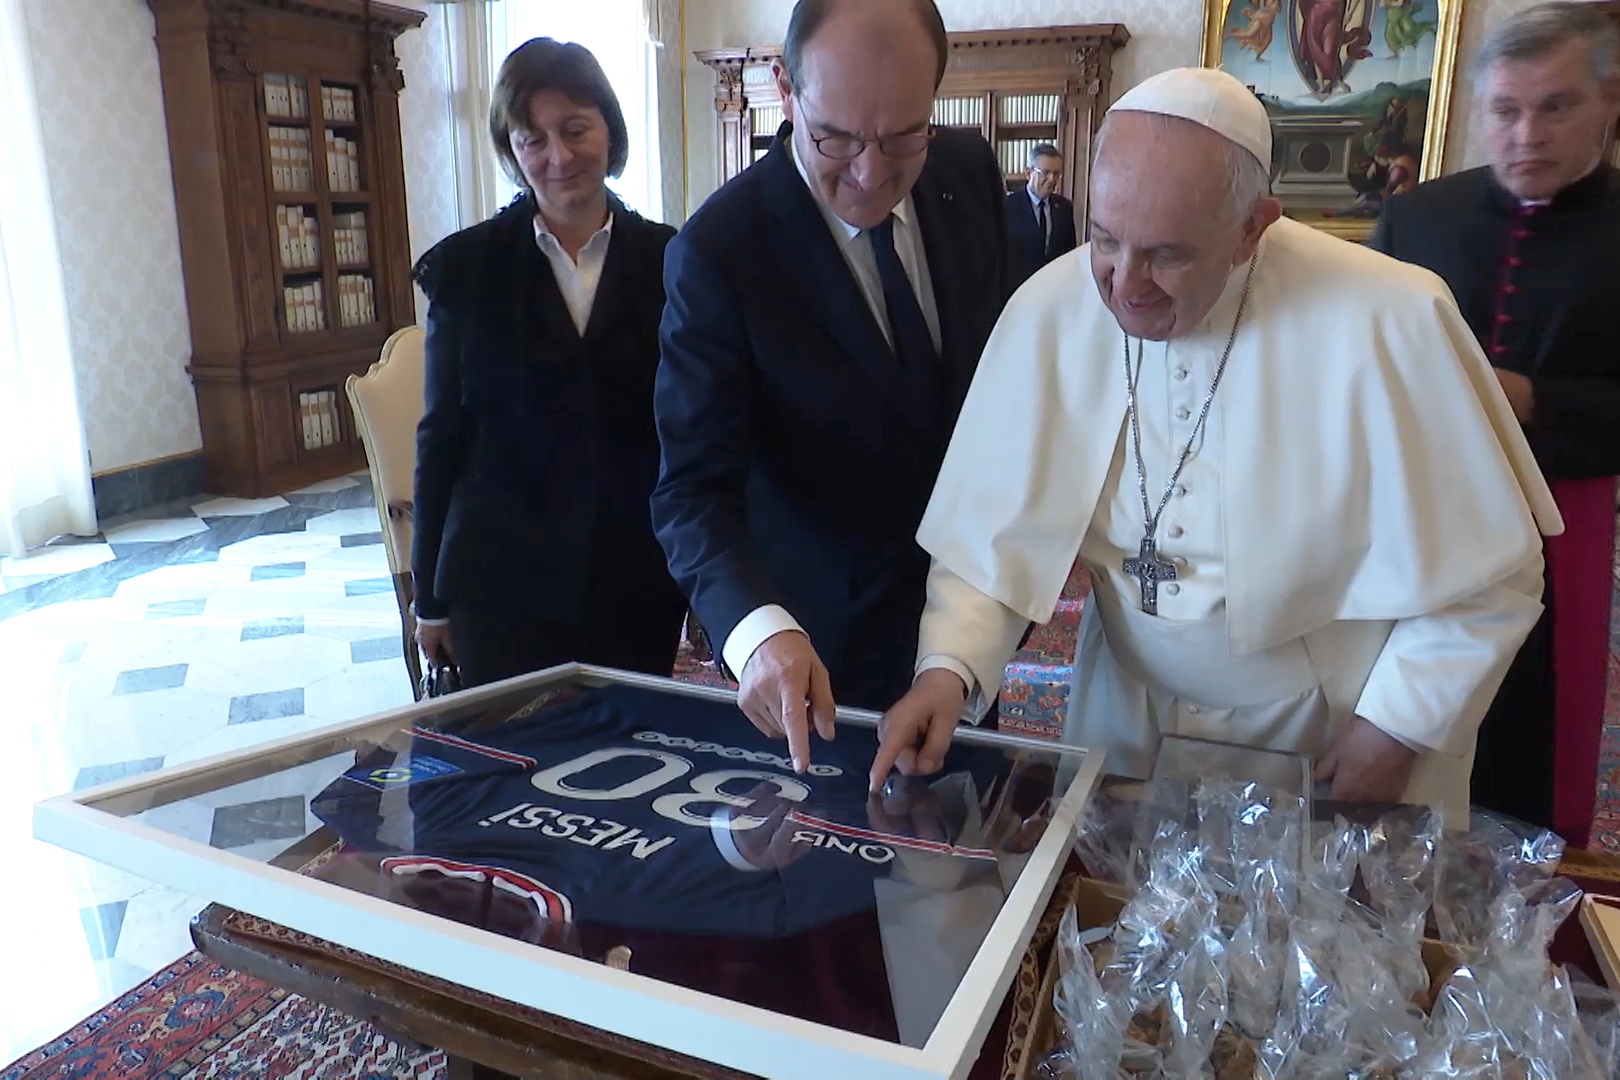 French PM Castex gives pope signed Lionel Messi jersey | Reuters